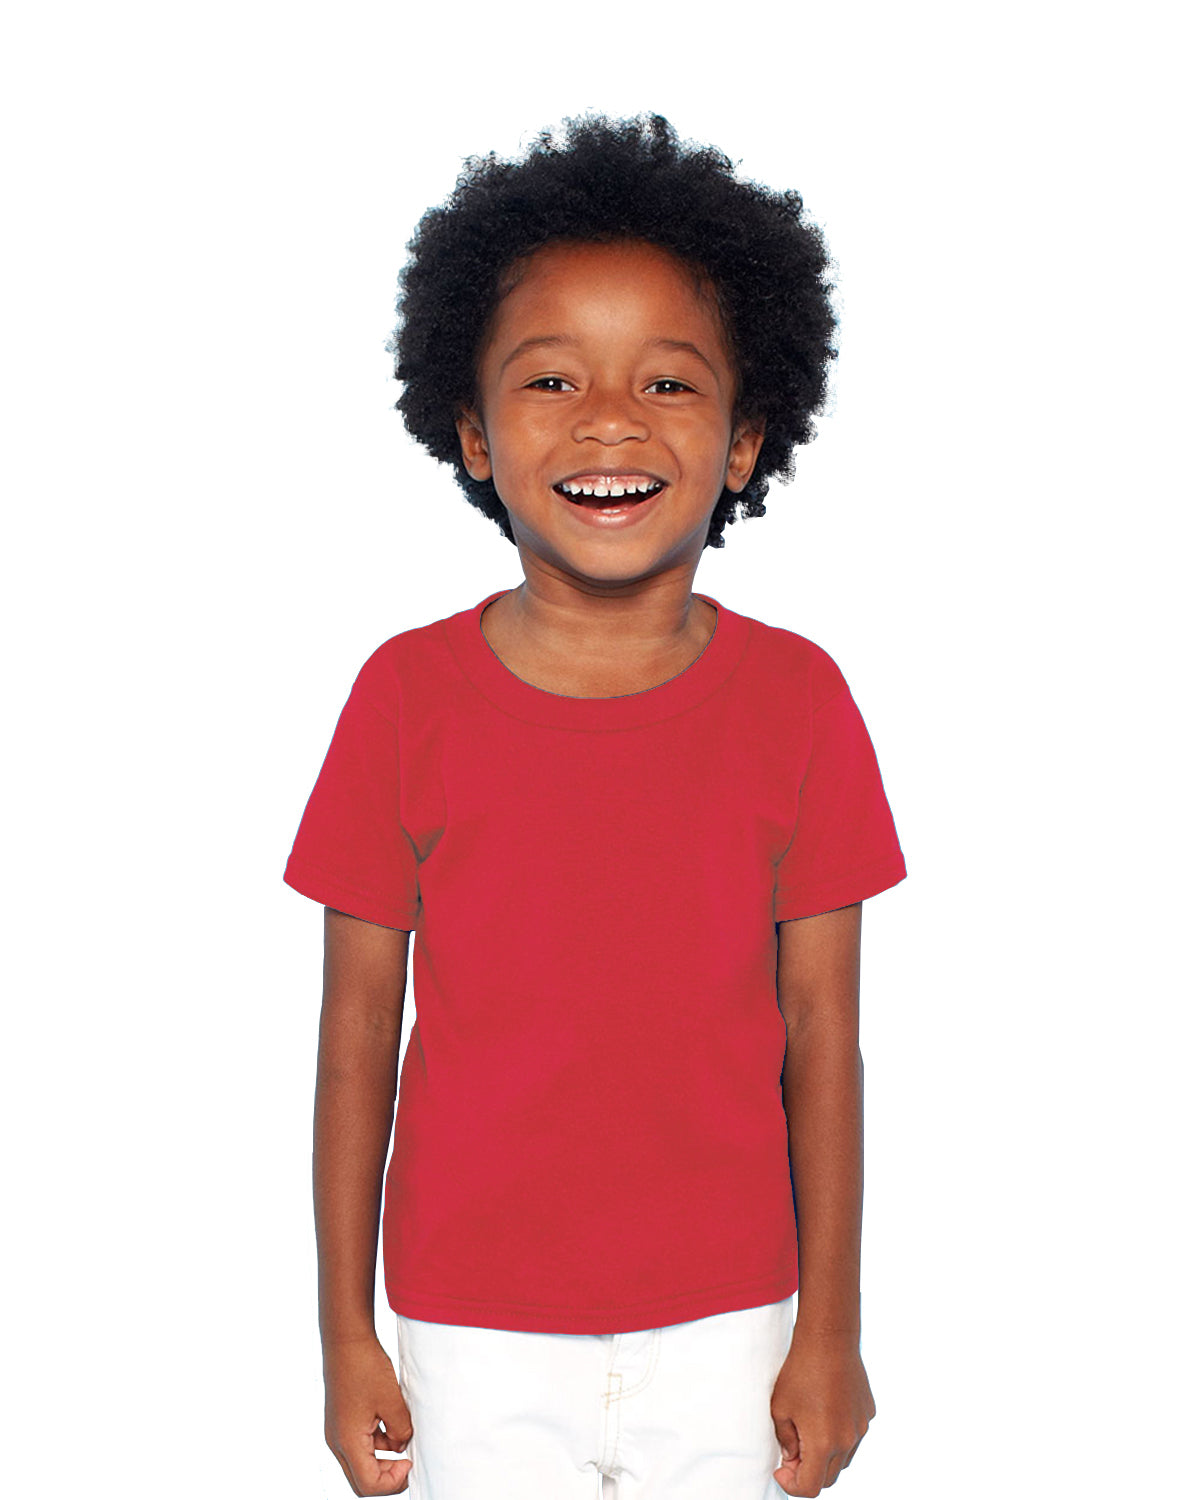 Toddlers  T-Shirt